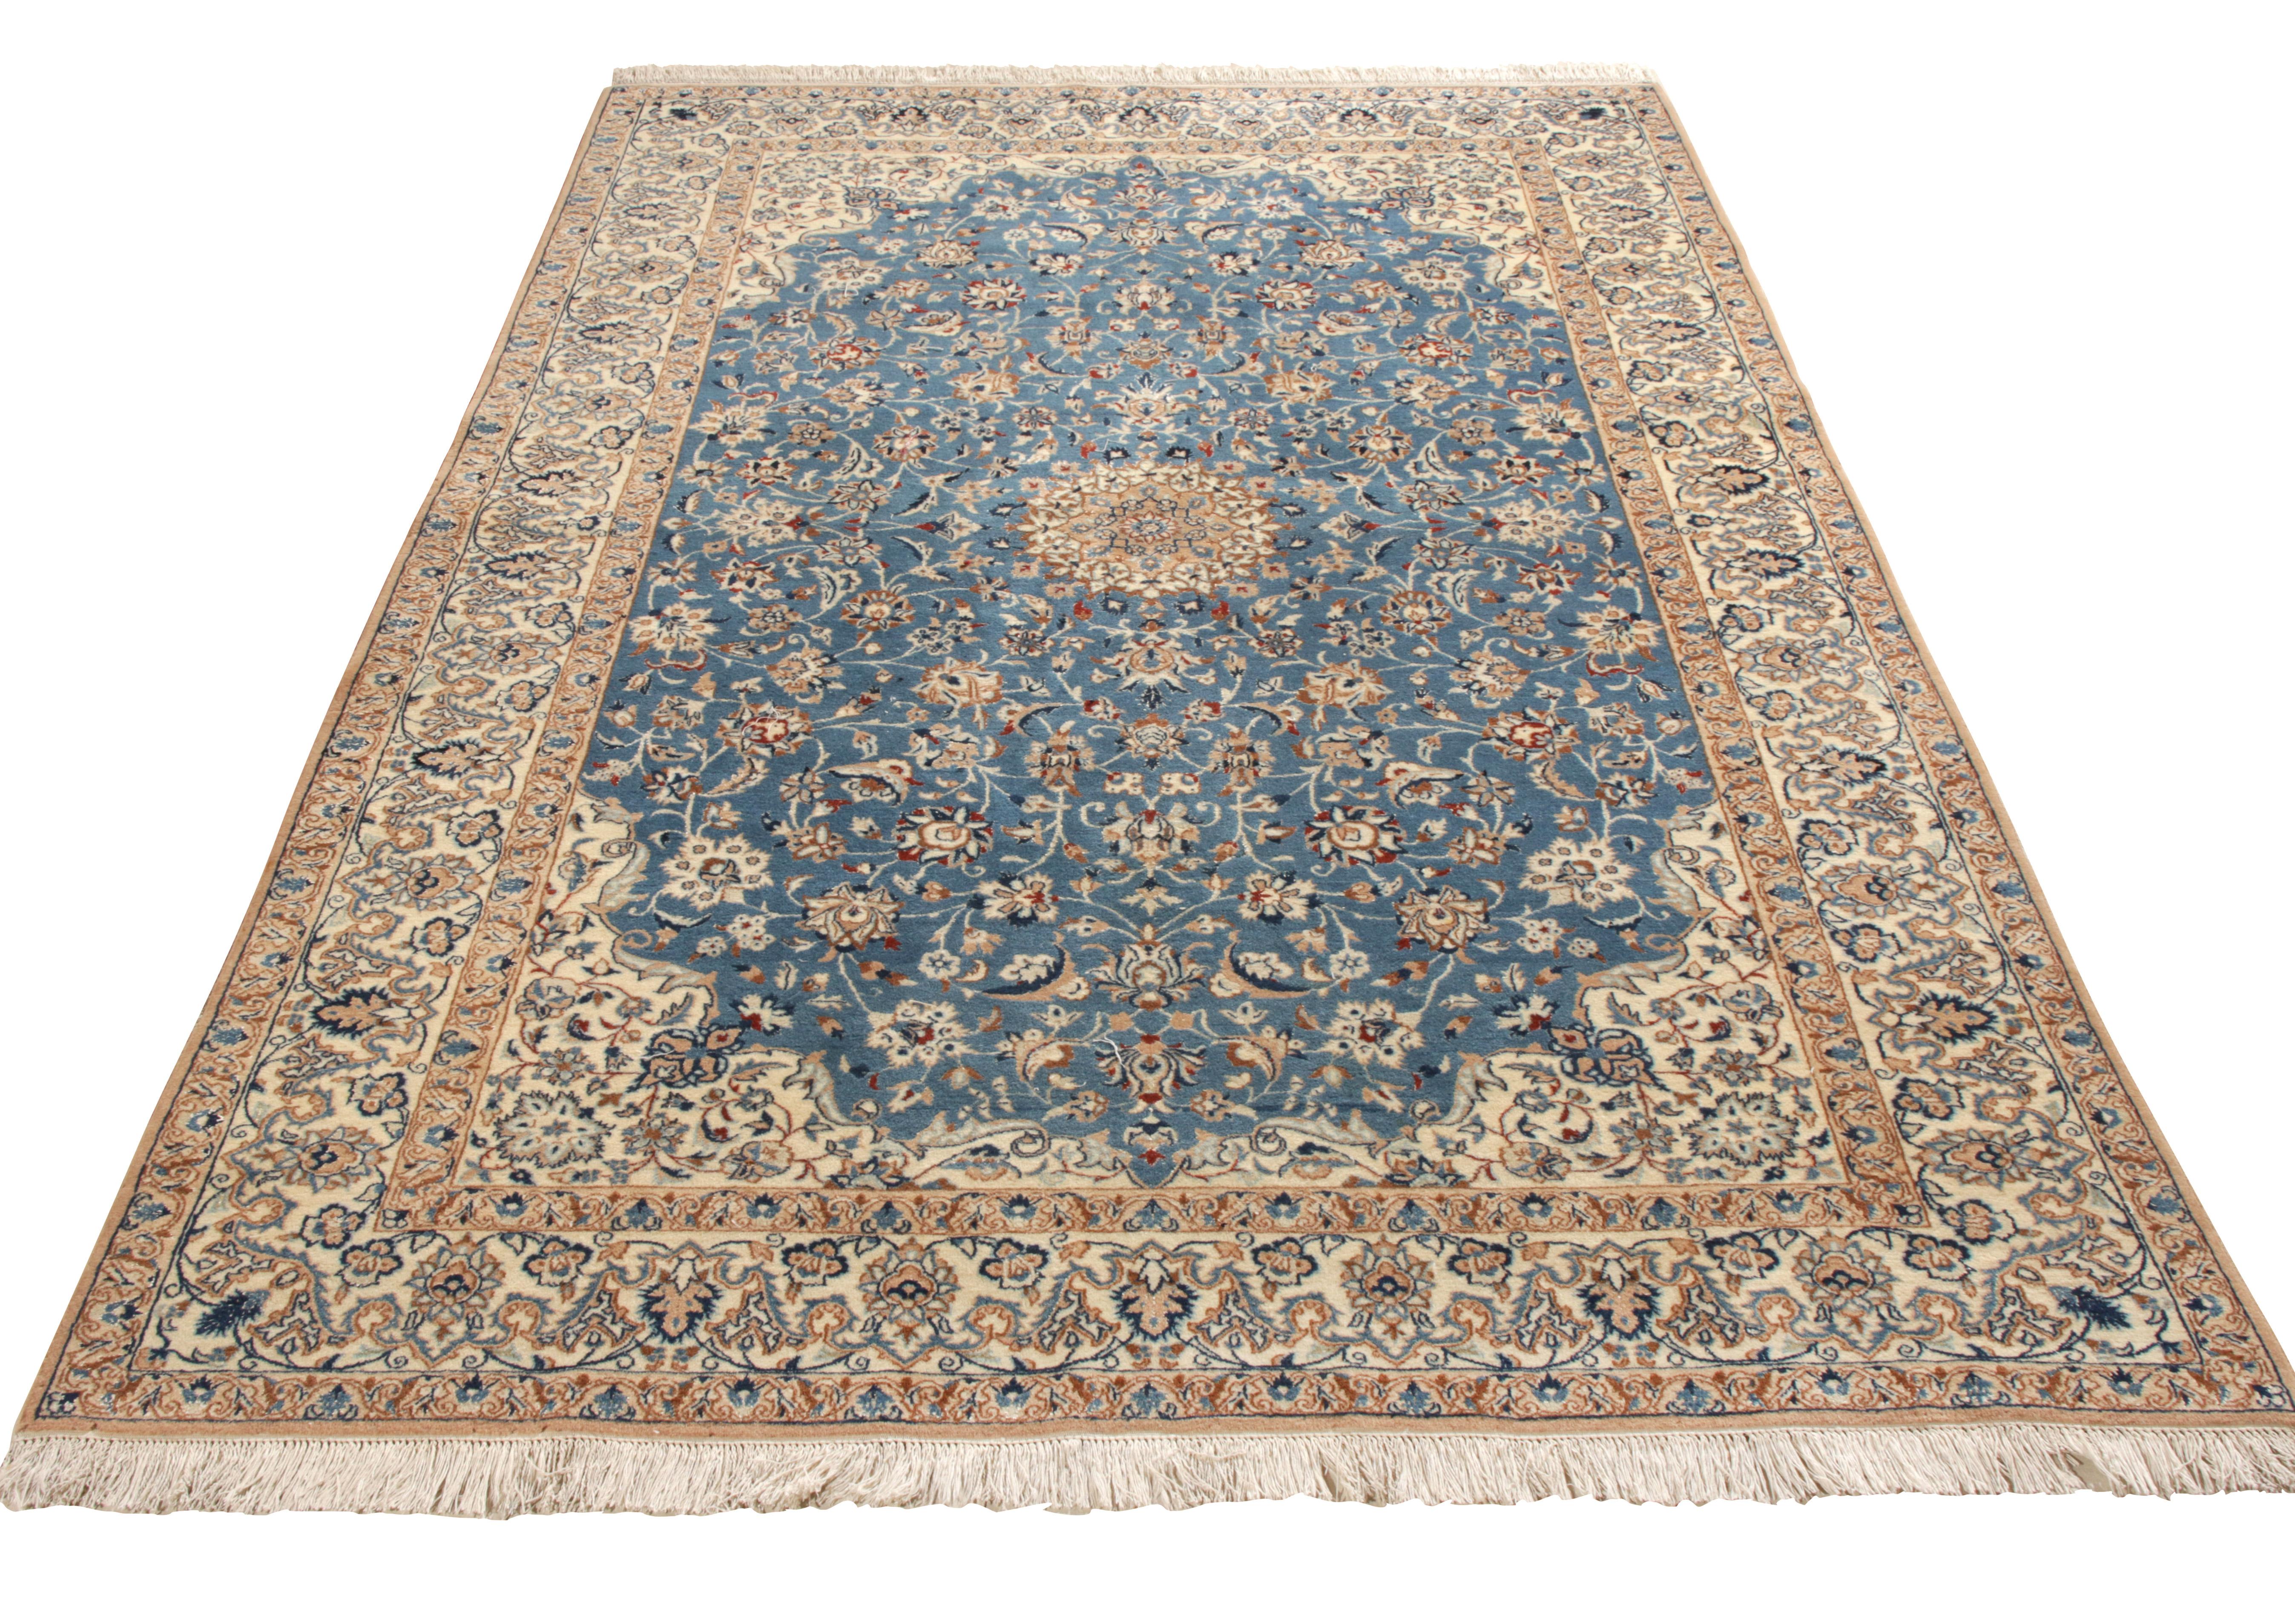 Hand-knotted in gorgeous tones of blue and beige, a mid-century 5x8 Naiin Persian rug entering Rug & Kilim’s Antique & Vintage collection. Hailing from the 1950s, this piece dwells in the reverie of classic medallion patterns in a lush blue